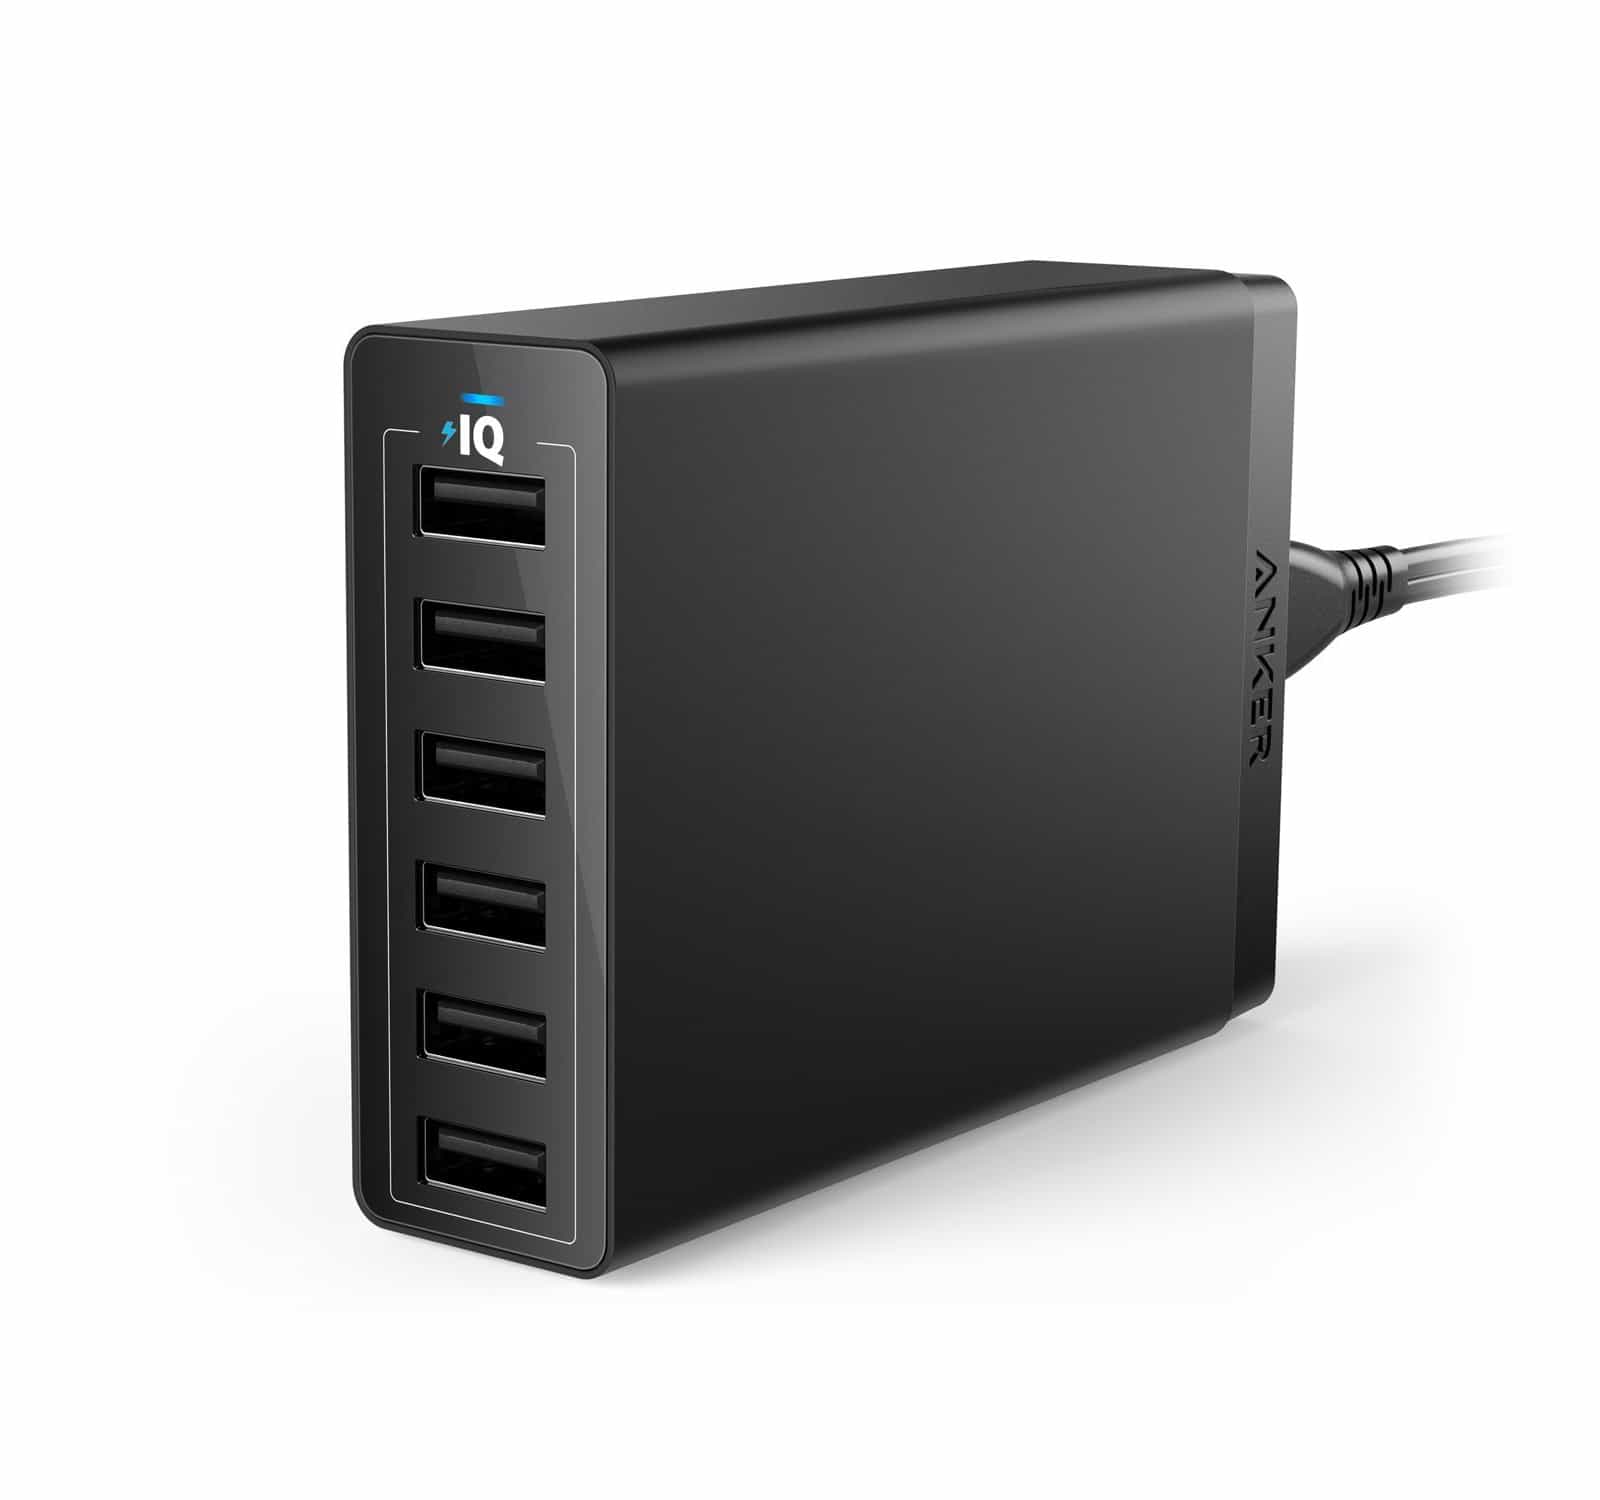 anker usb charger